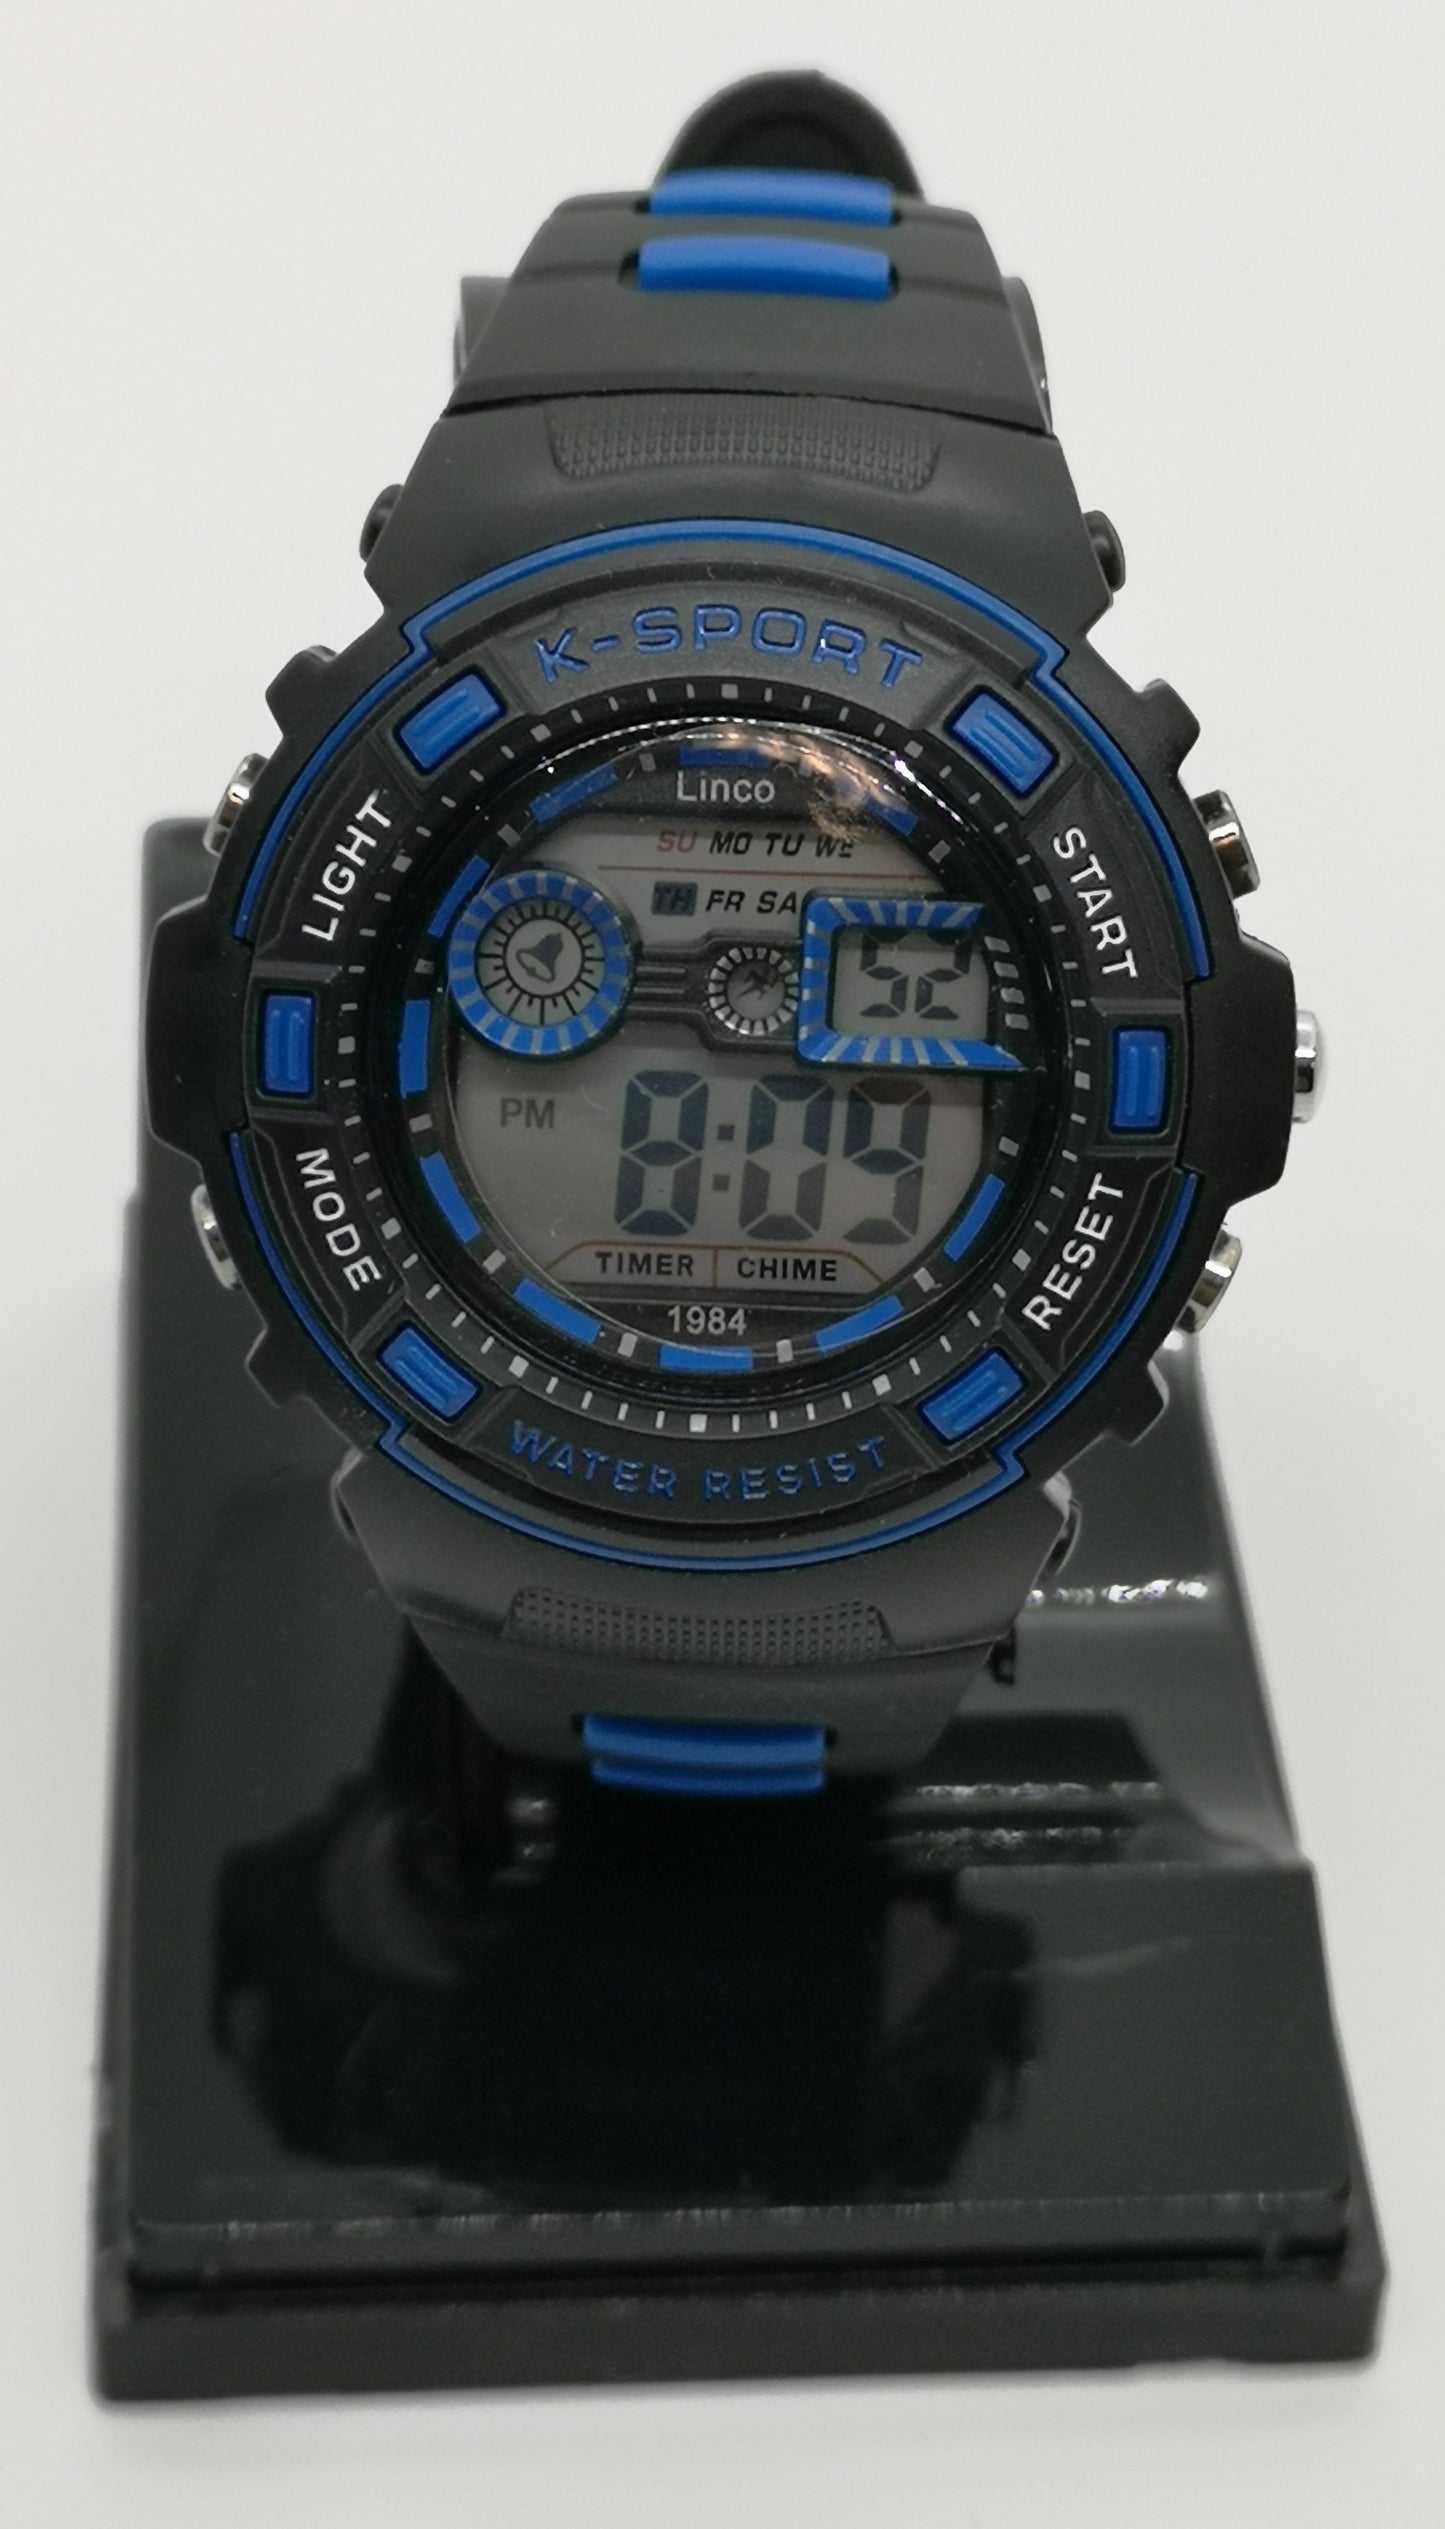 Digital black and blue small 3.5cm face water resistant